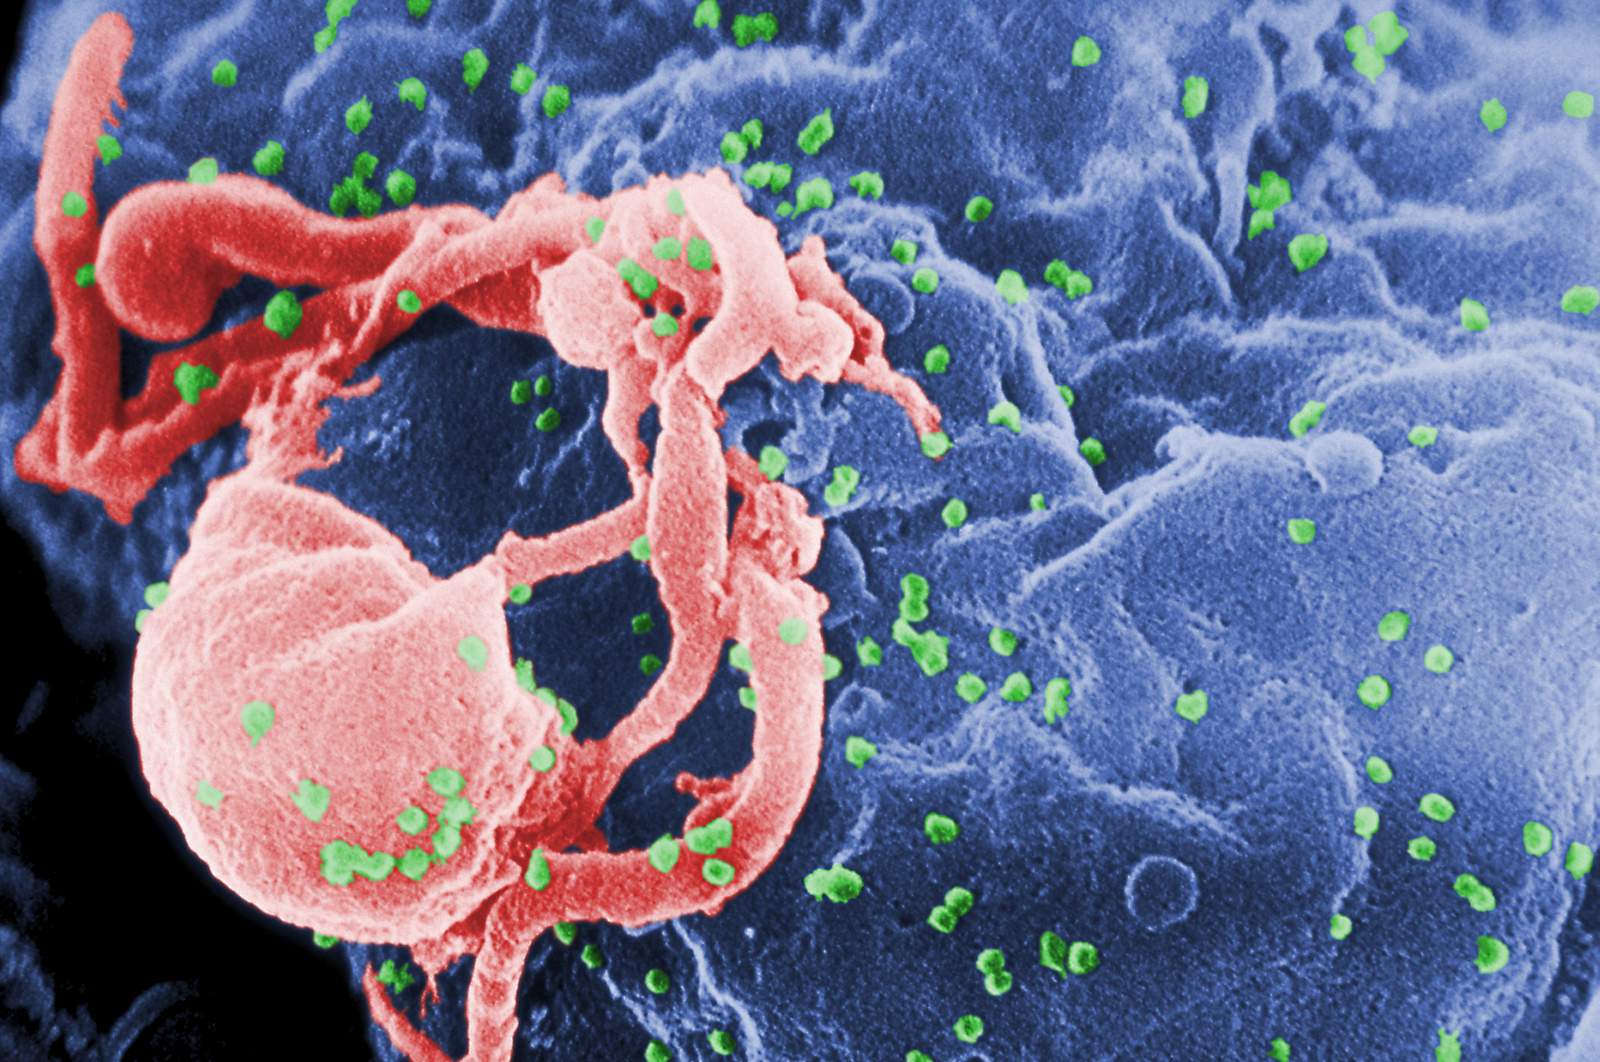 Study finds long-acting shot helps women avoid HIV infection